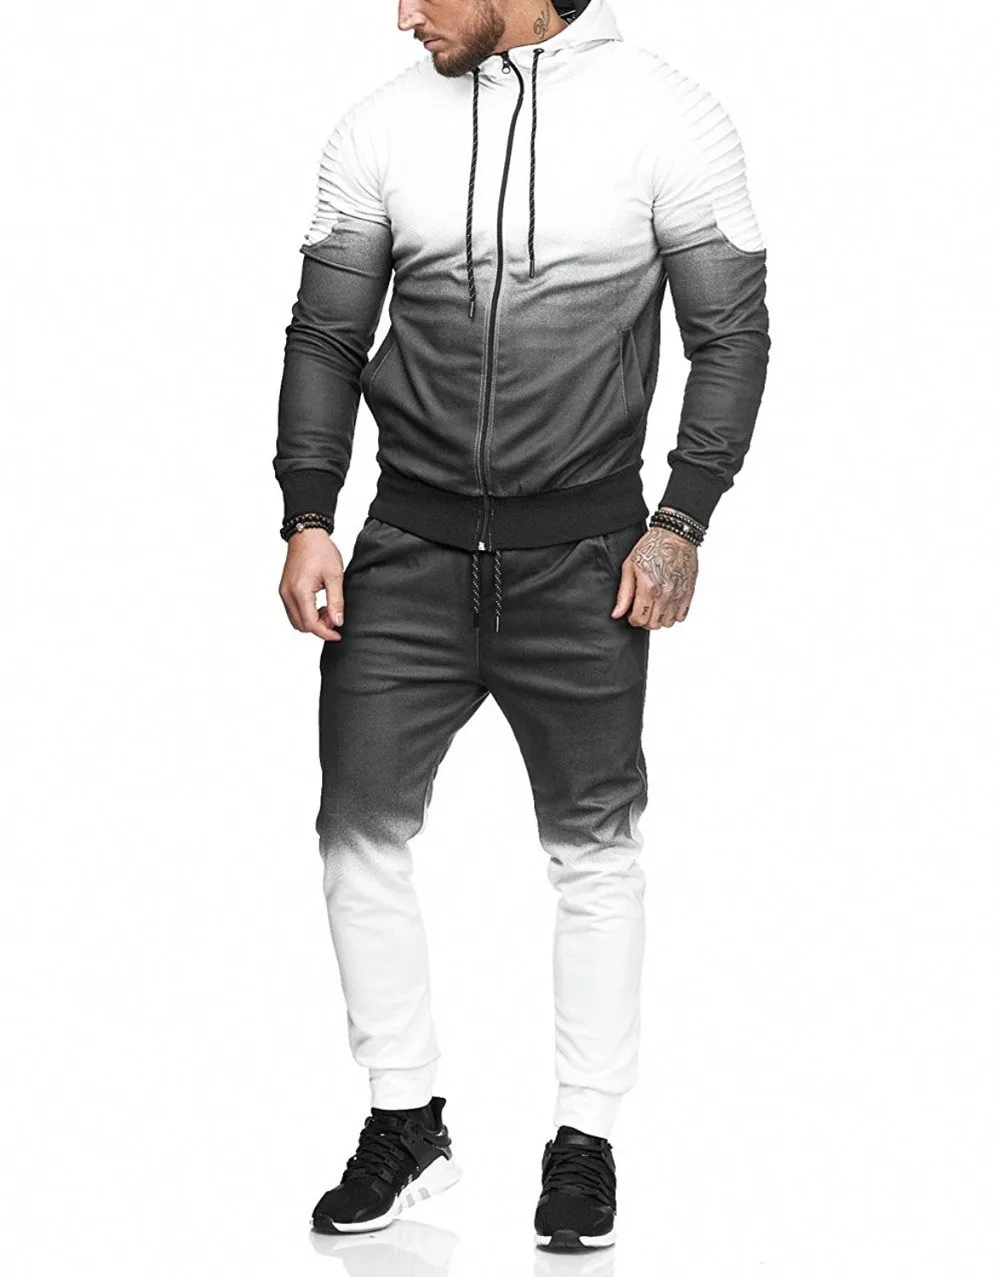 Wholesale Sport Gym Wear Muscle Mens Tracksuit - Buy Matching ...